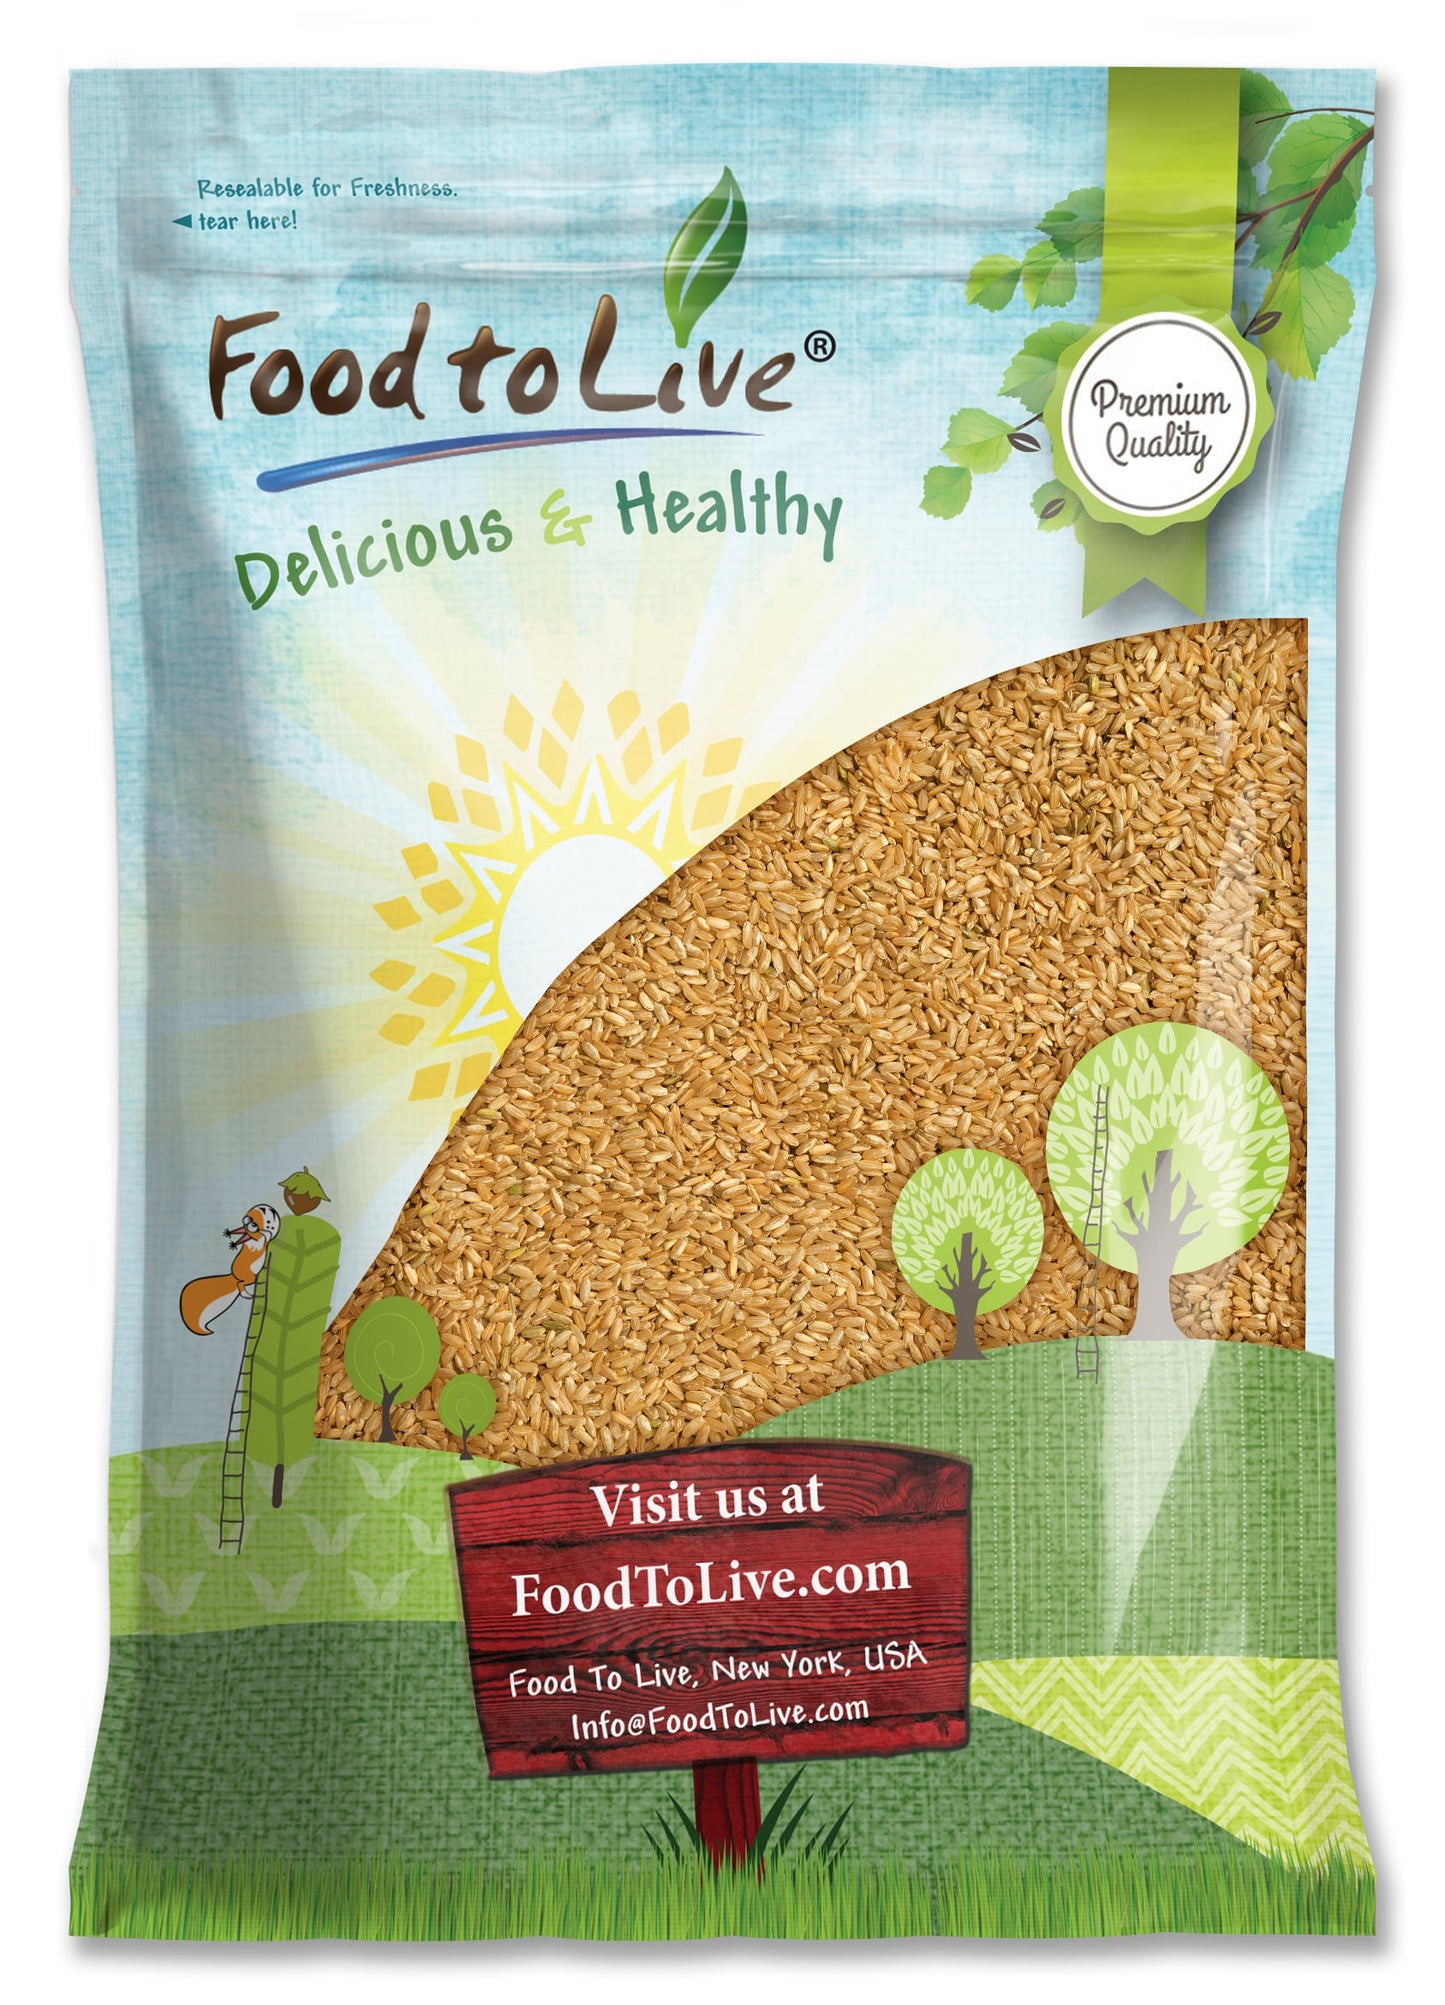 Parboiled Long Grain Brown Rice - Whole Grain, Kosher, Vegan, Bulk. Partially Precooked Converted Rice. Easy-cook Rice is Great for Making Idlis and Dosas. Rich in Vitamins and Minerals